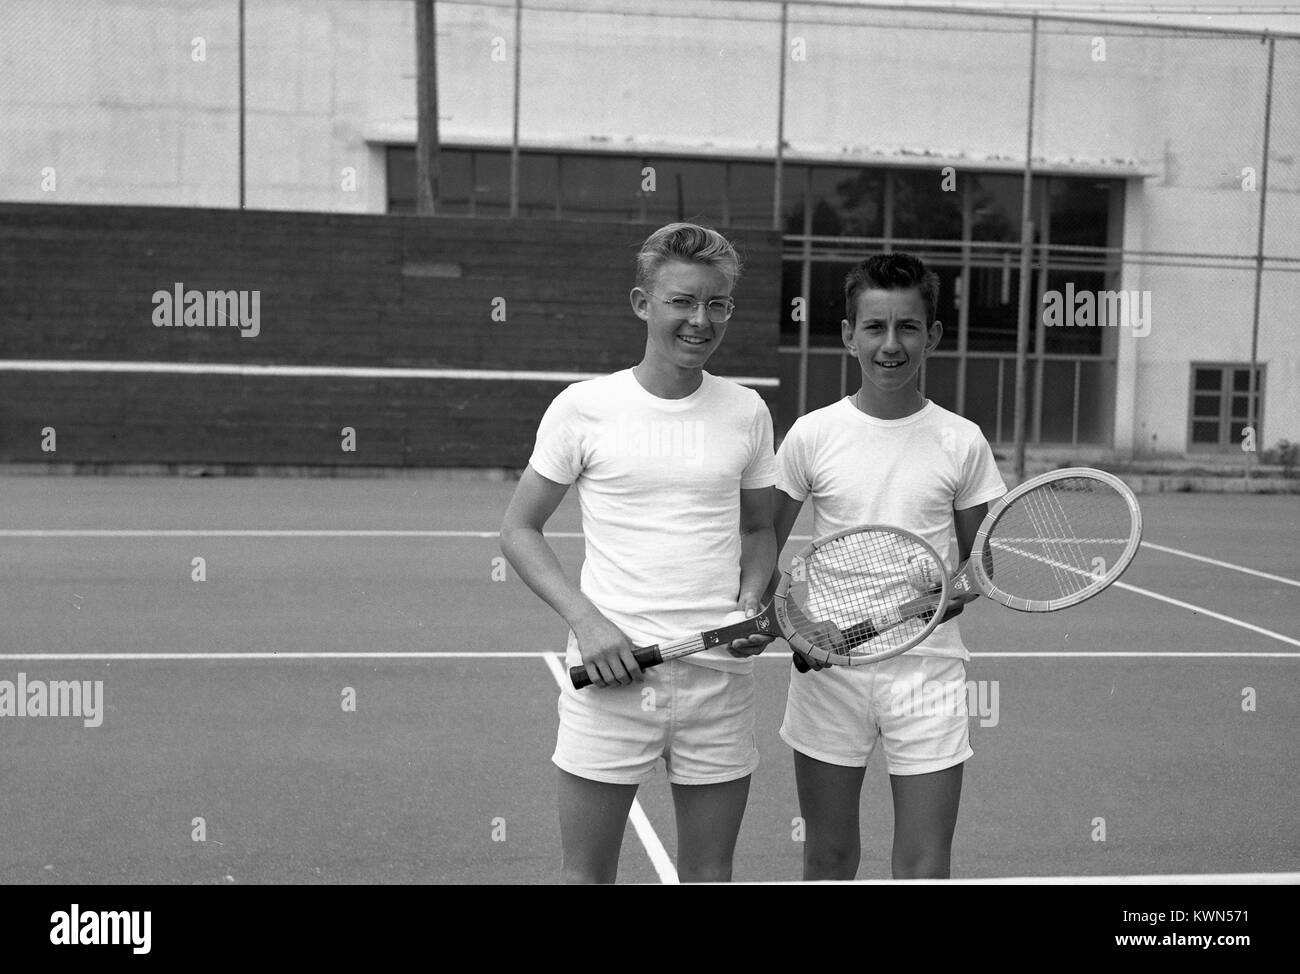 Two young boys wearing white athletic apparel hold tennis rackets and post for a photograph on a tennis court prior to a match, Monterey, California, 1950. Stock Photo